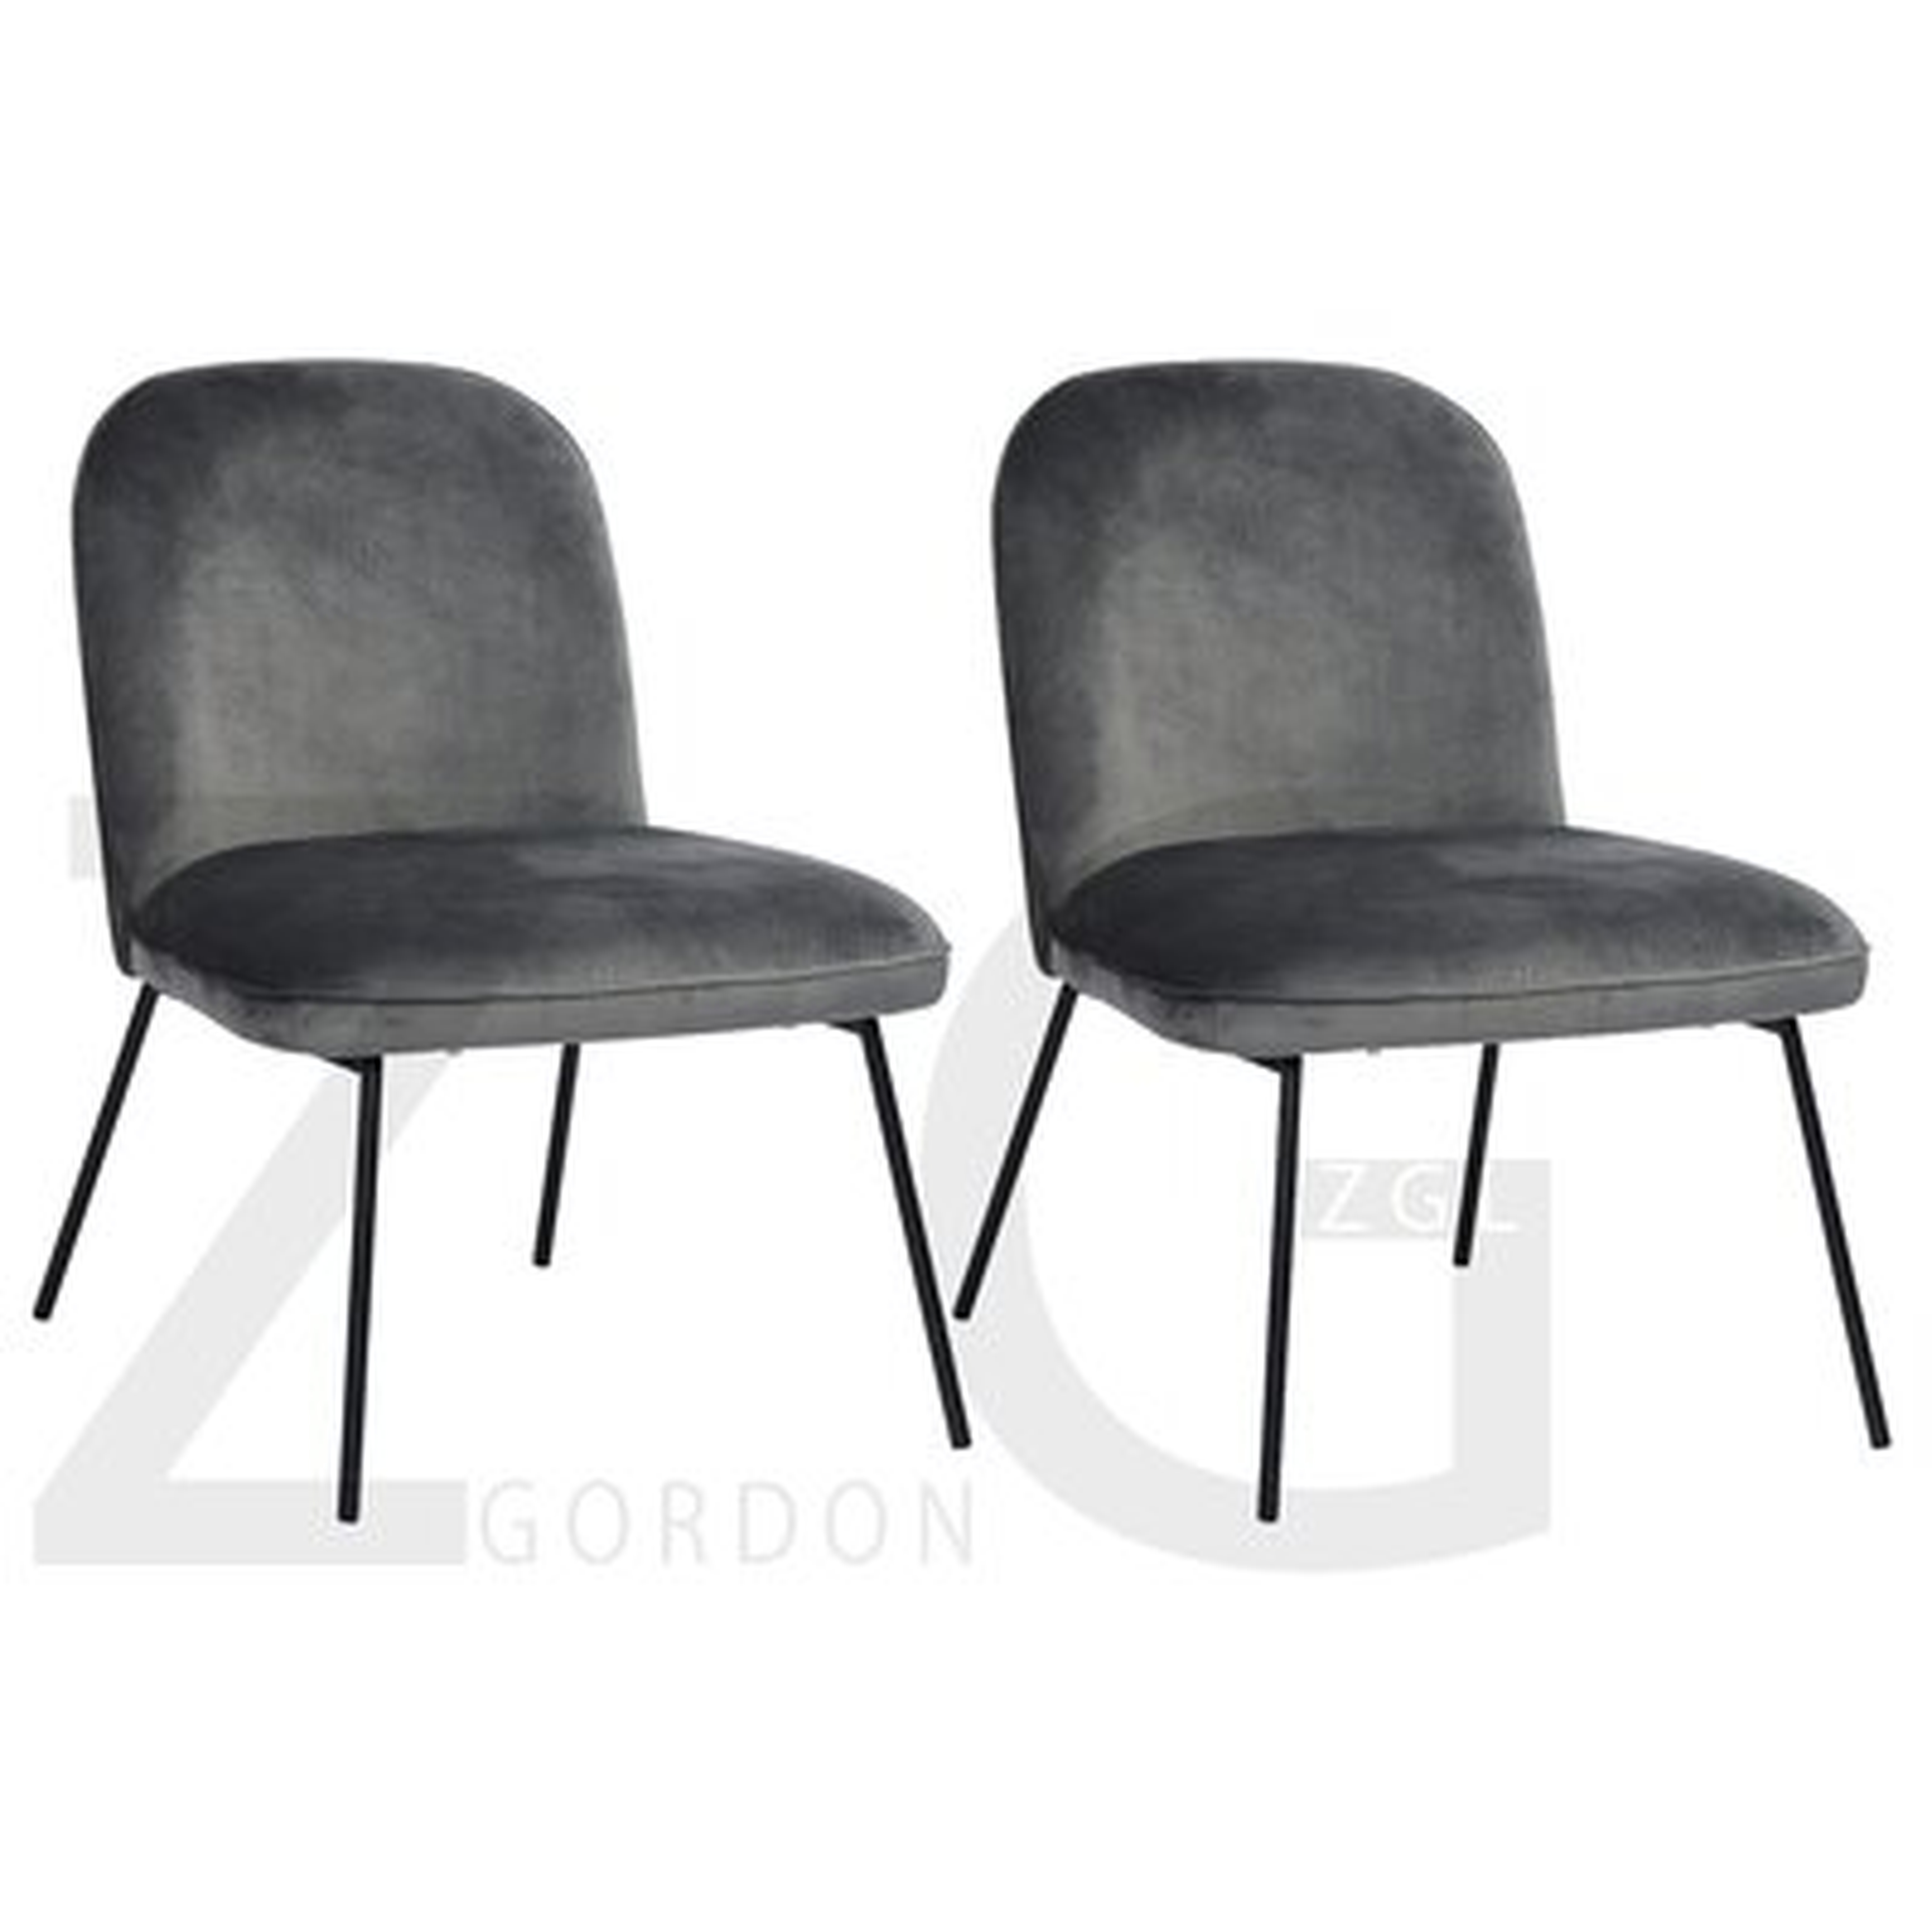 Modern Gray Dining Chair (Set Of 2 ),Side Chair With Velvet Cushion Seat And Back For DINING And Living Room - Wayfair